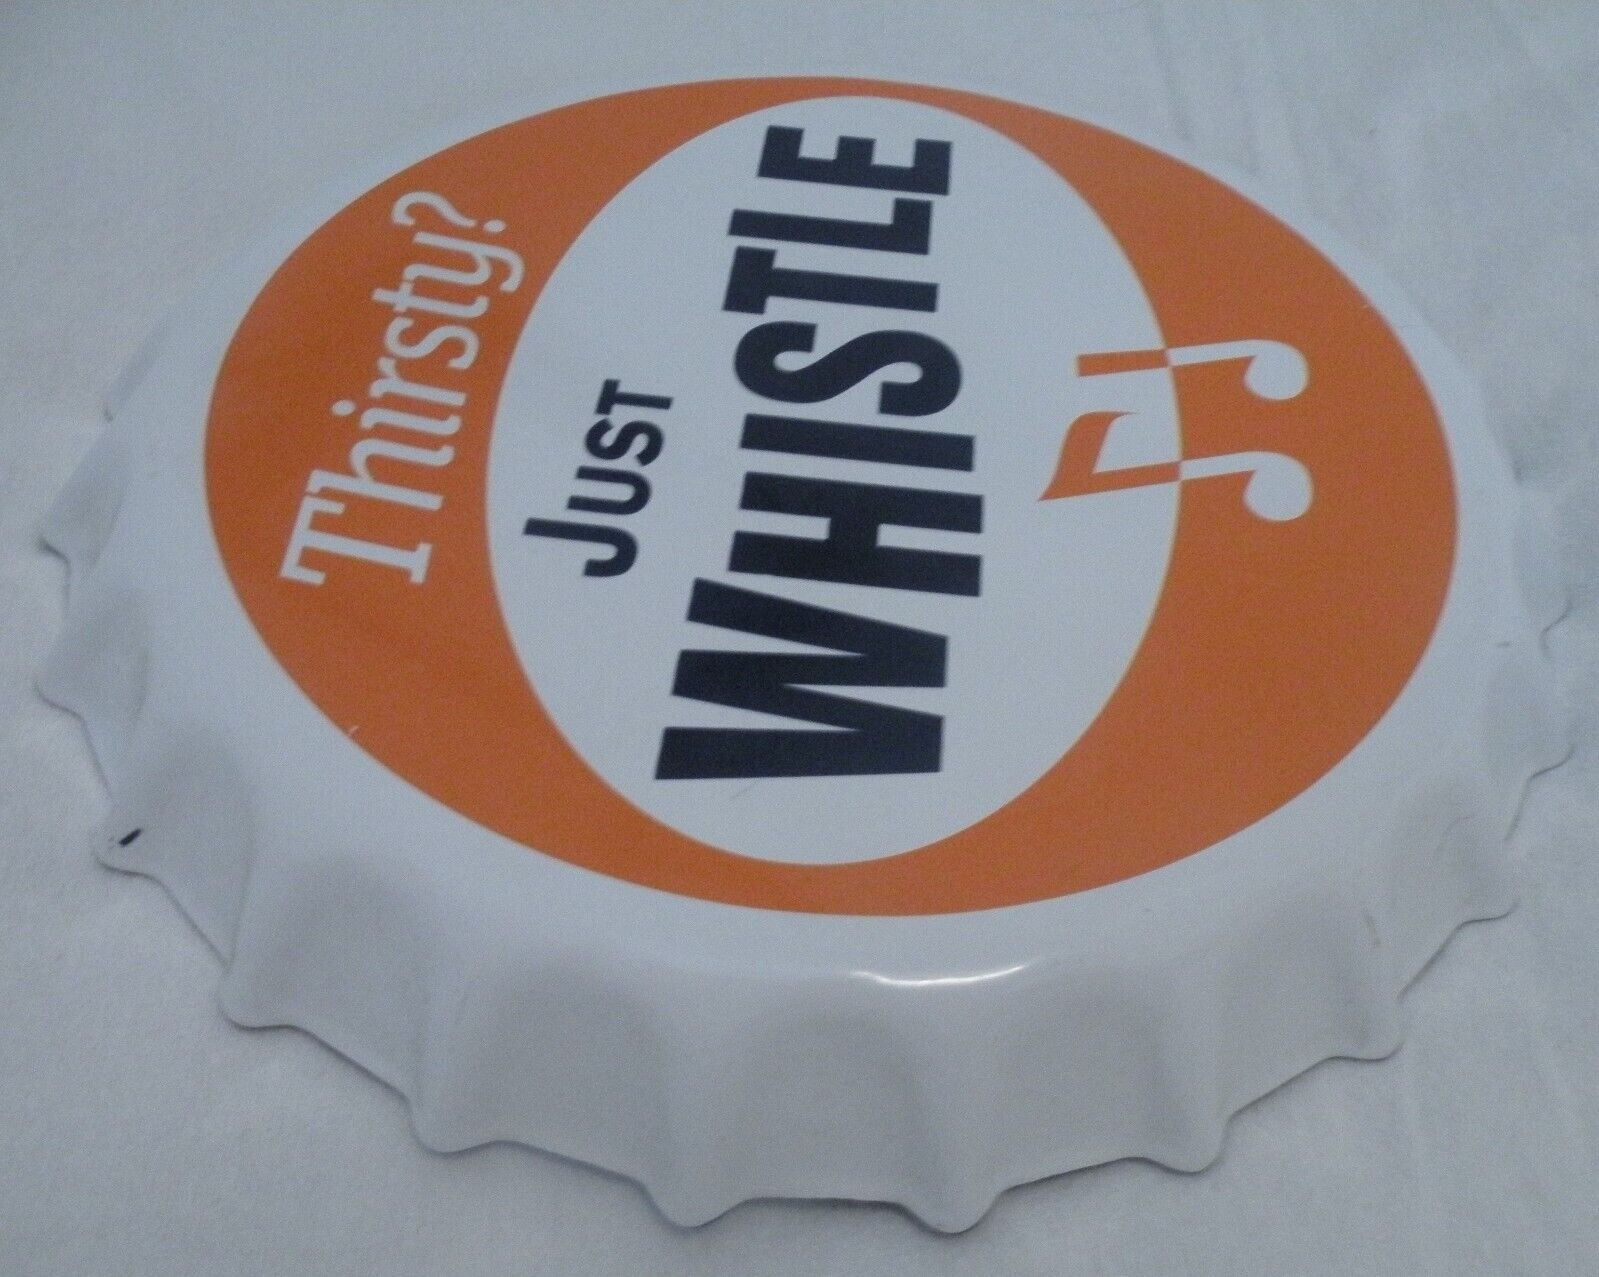 Thirsty Just Whistle Bottle Cap Sign - Authentic VTG Rare Excellent Condition